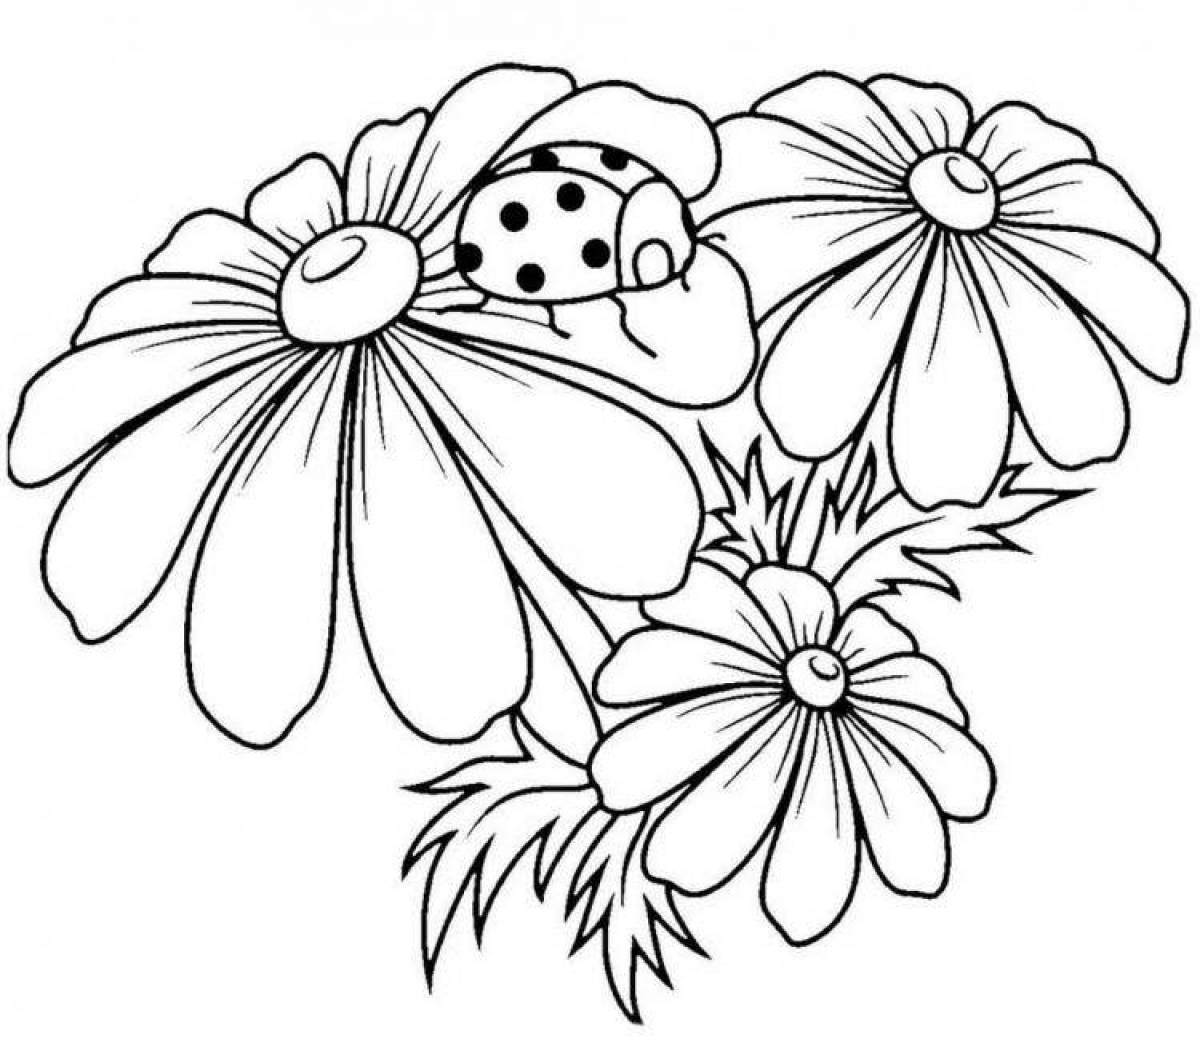 Glowing Daisy Coloring Page